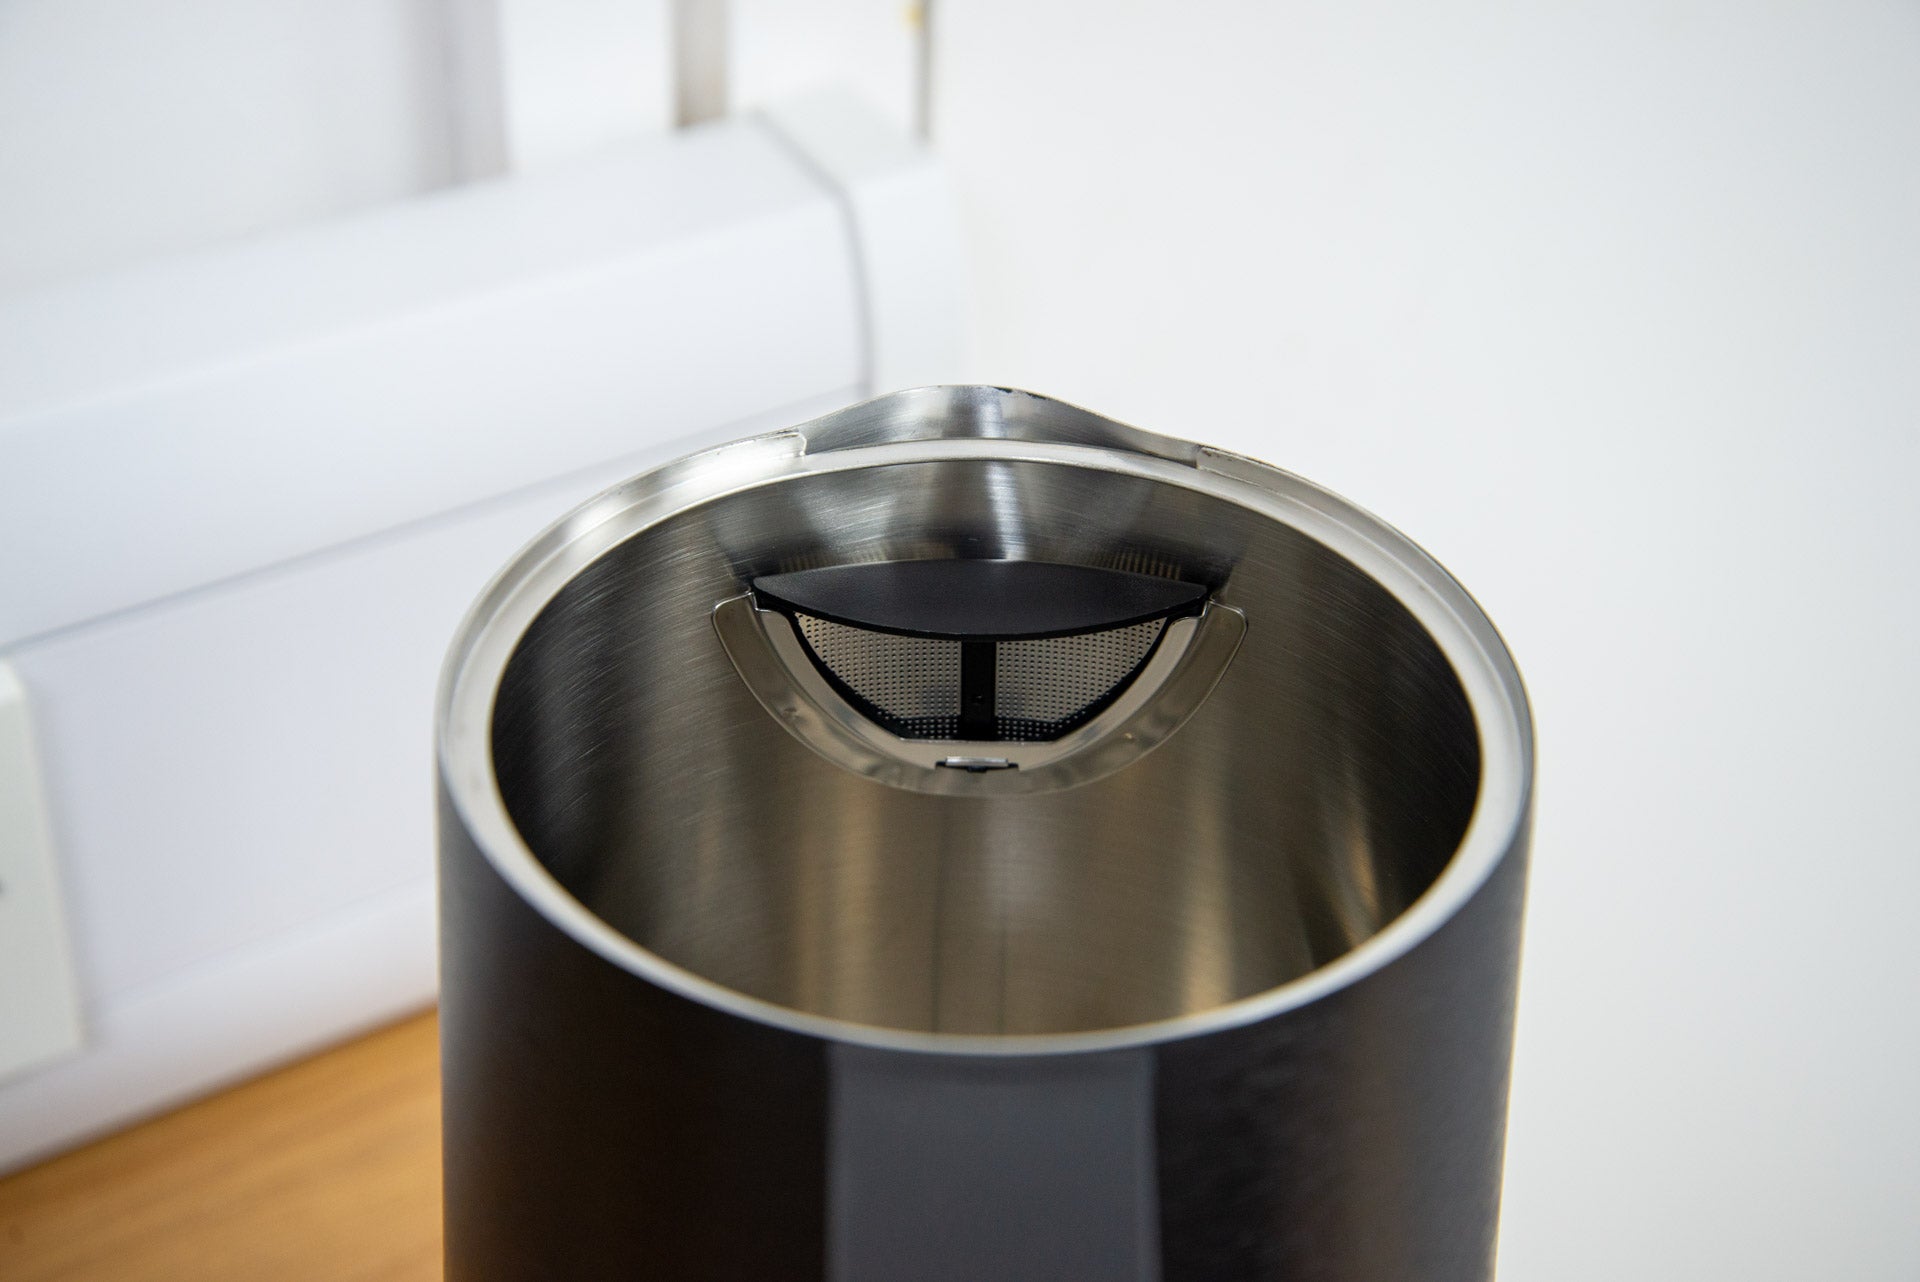 Haier Kettle I-Master Series 5 limescale filter